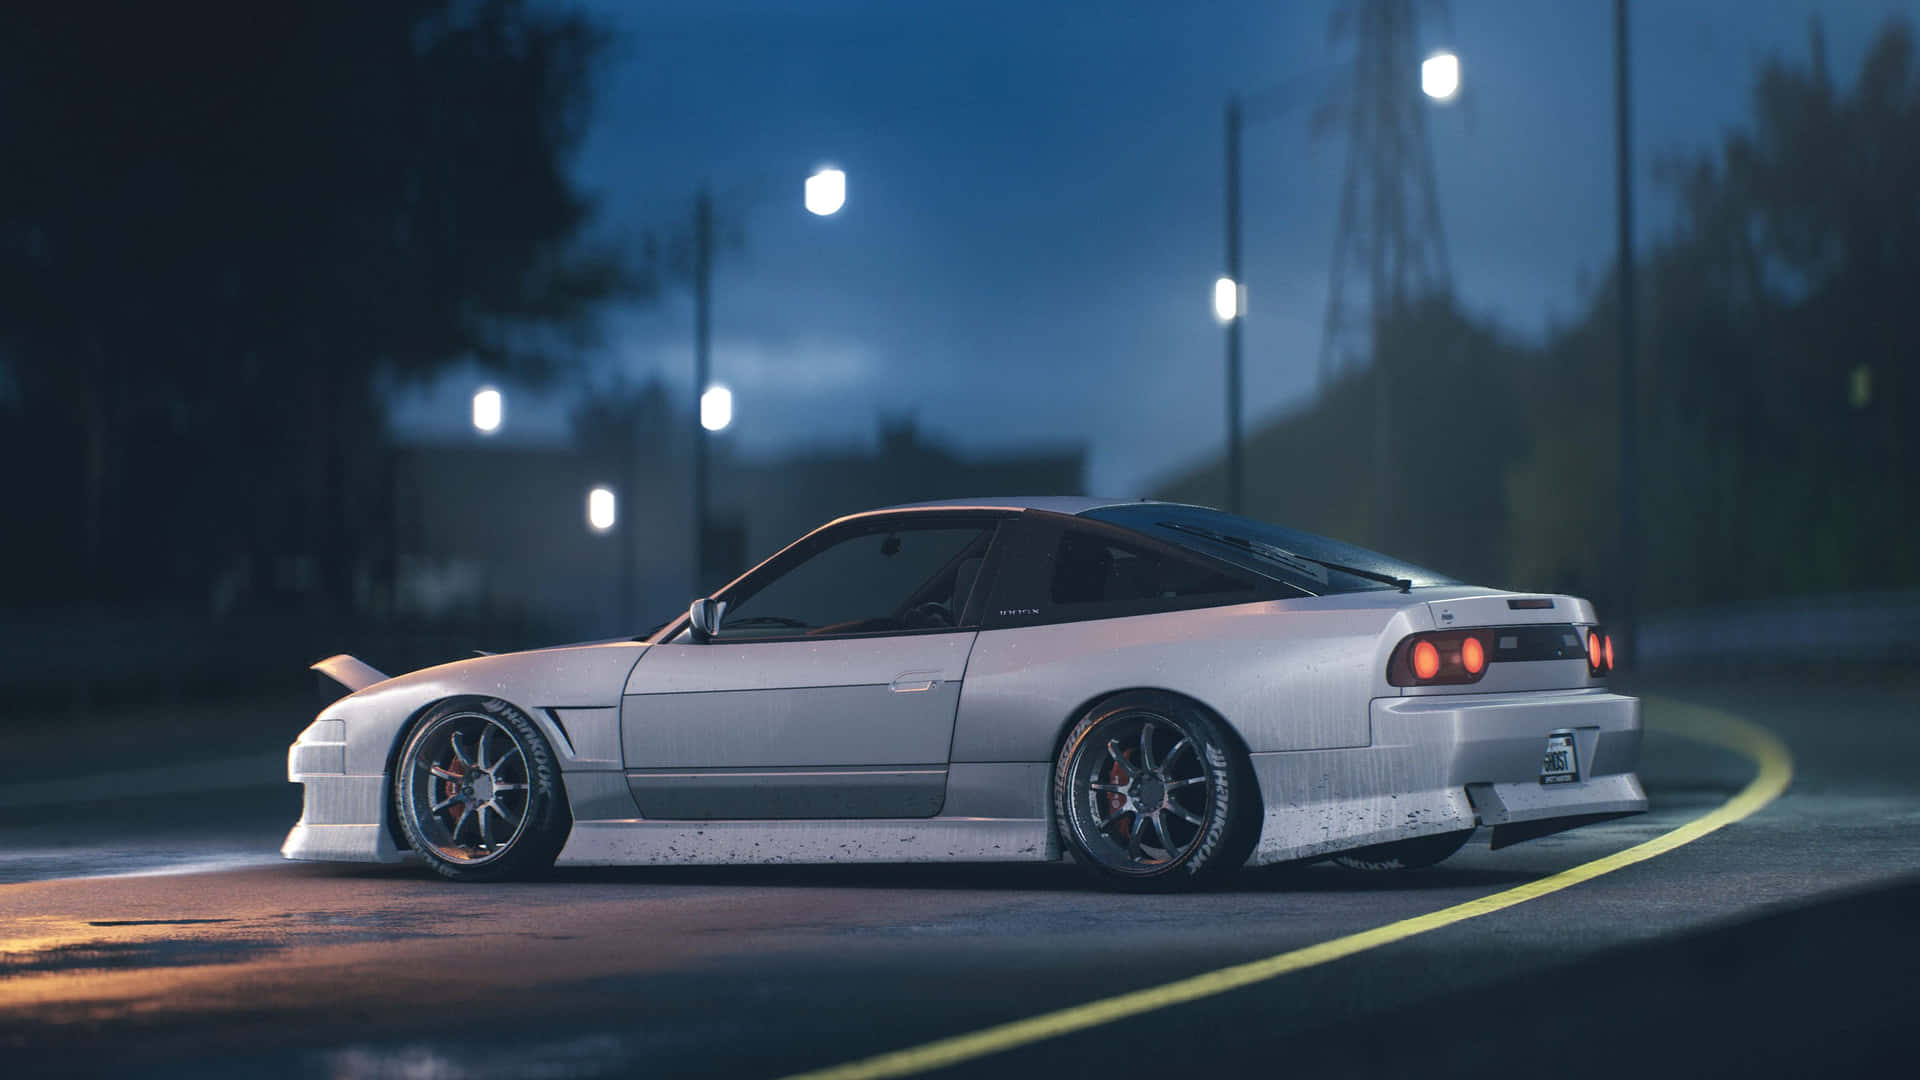 Powerful, unique and highly sought-after - the Nissan Silvia S13 is a classic JDM performance car. Wallpaper